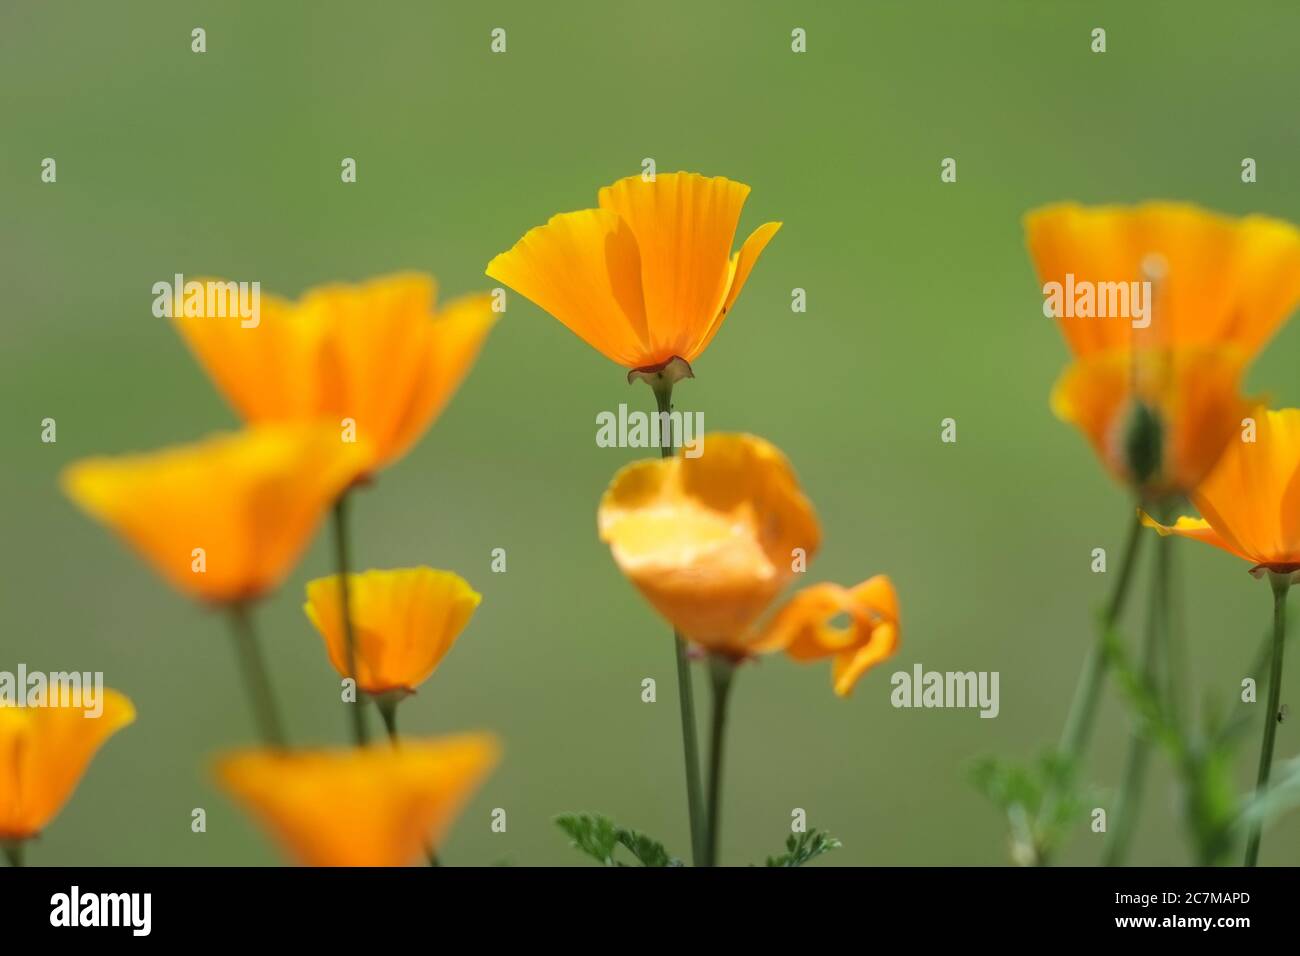 Selective focus shot of beautiful yellow California poppies with a blurred green background Stock Photo